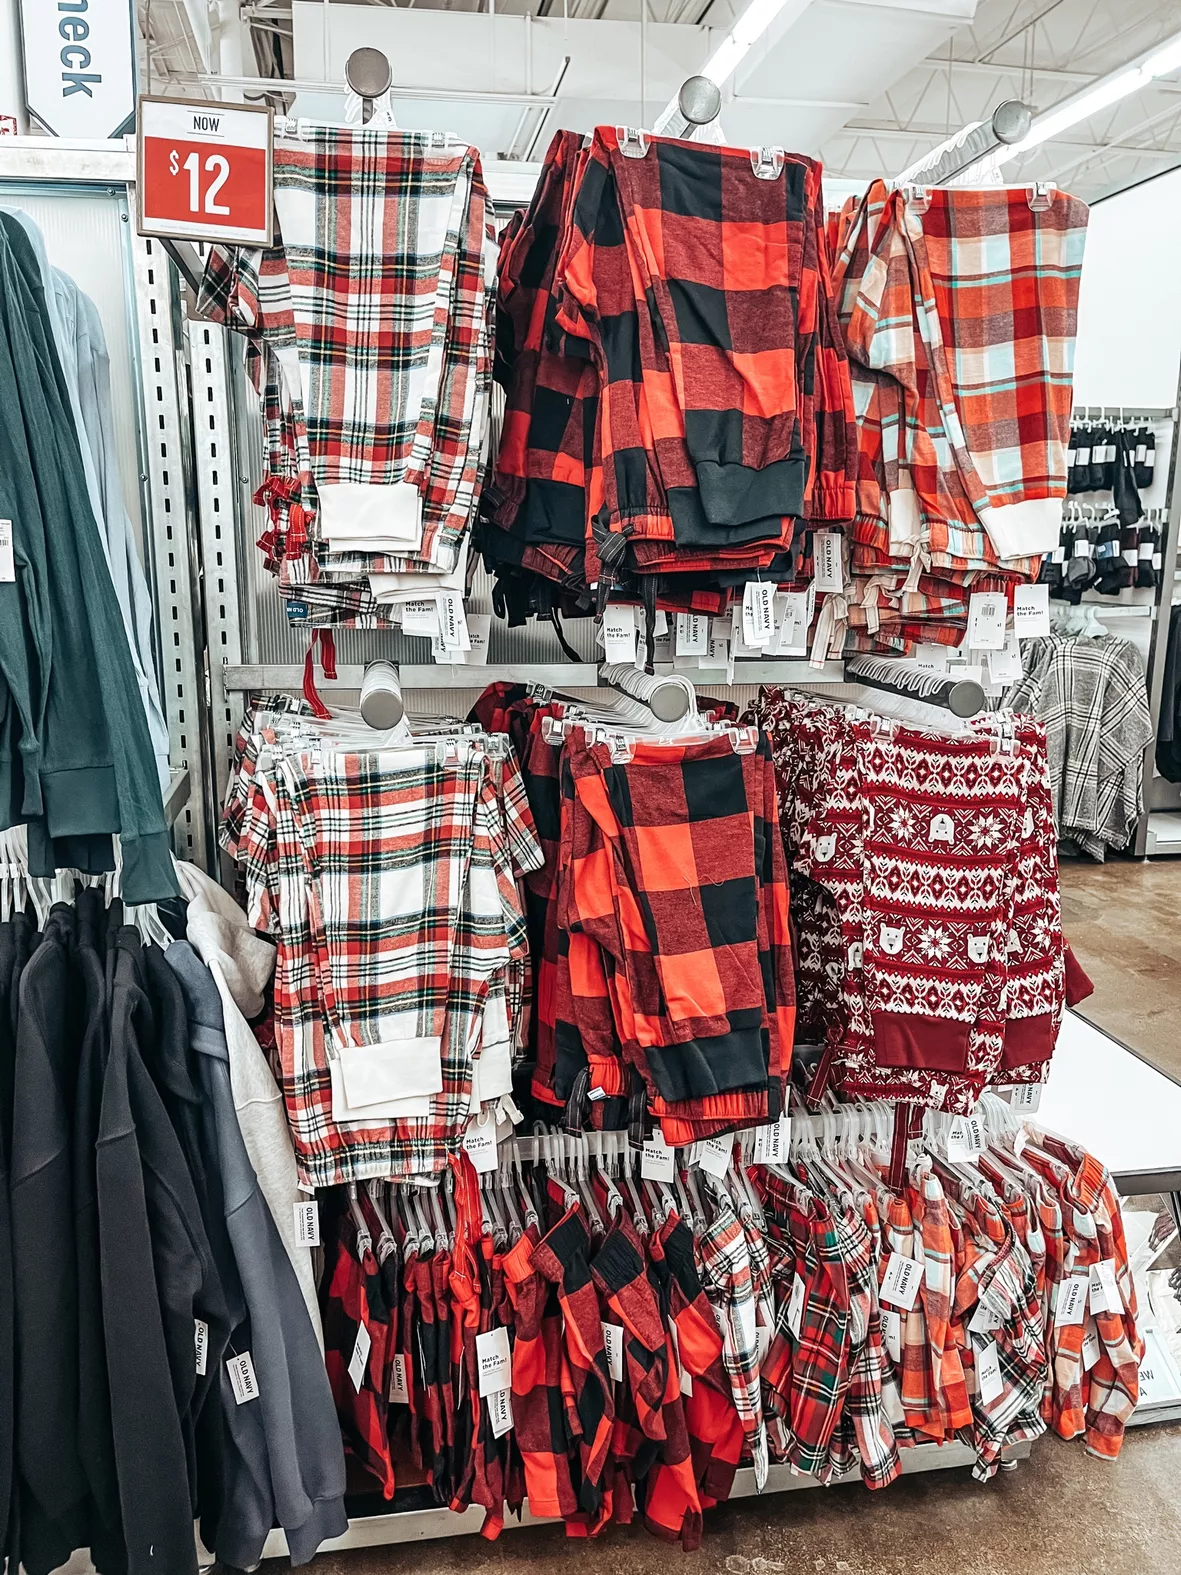 Old Navy Matching Flannel Pajama Set for Women Red Buffalo Plaid